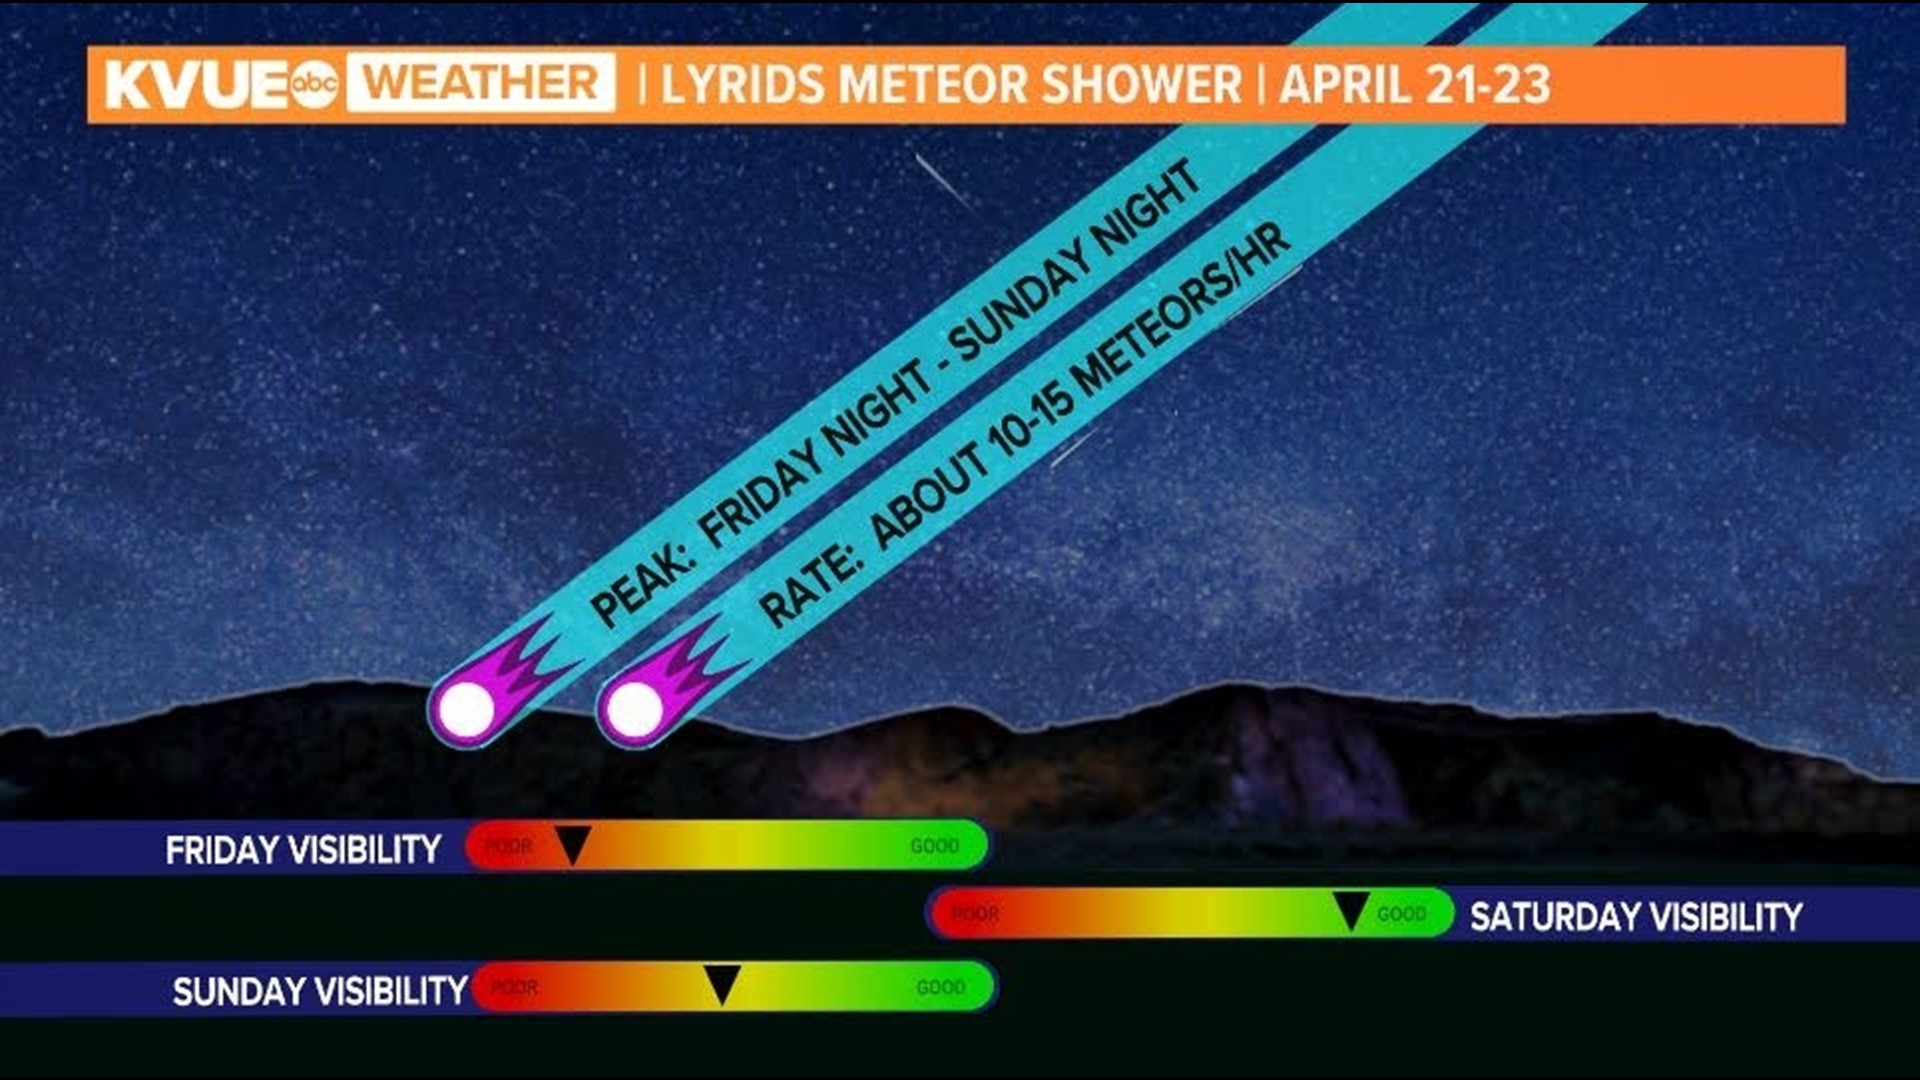 The Lyrids meteor shower will peak over the Northern Hemisphere this weekend, giving Central Texas a show!